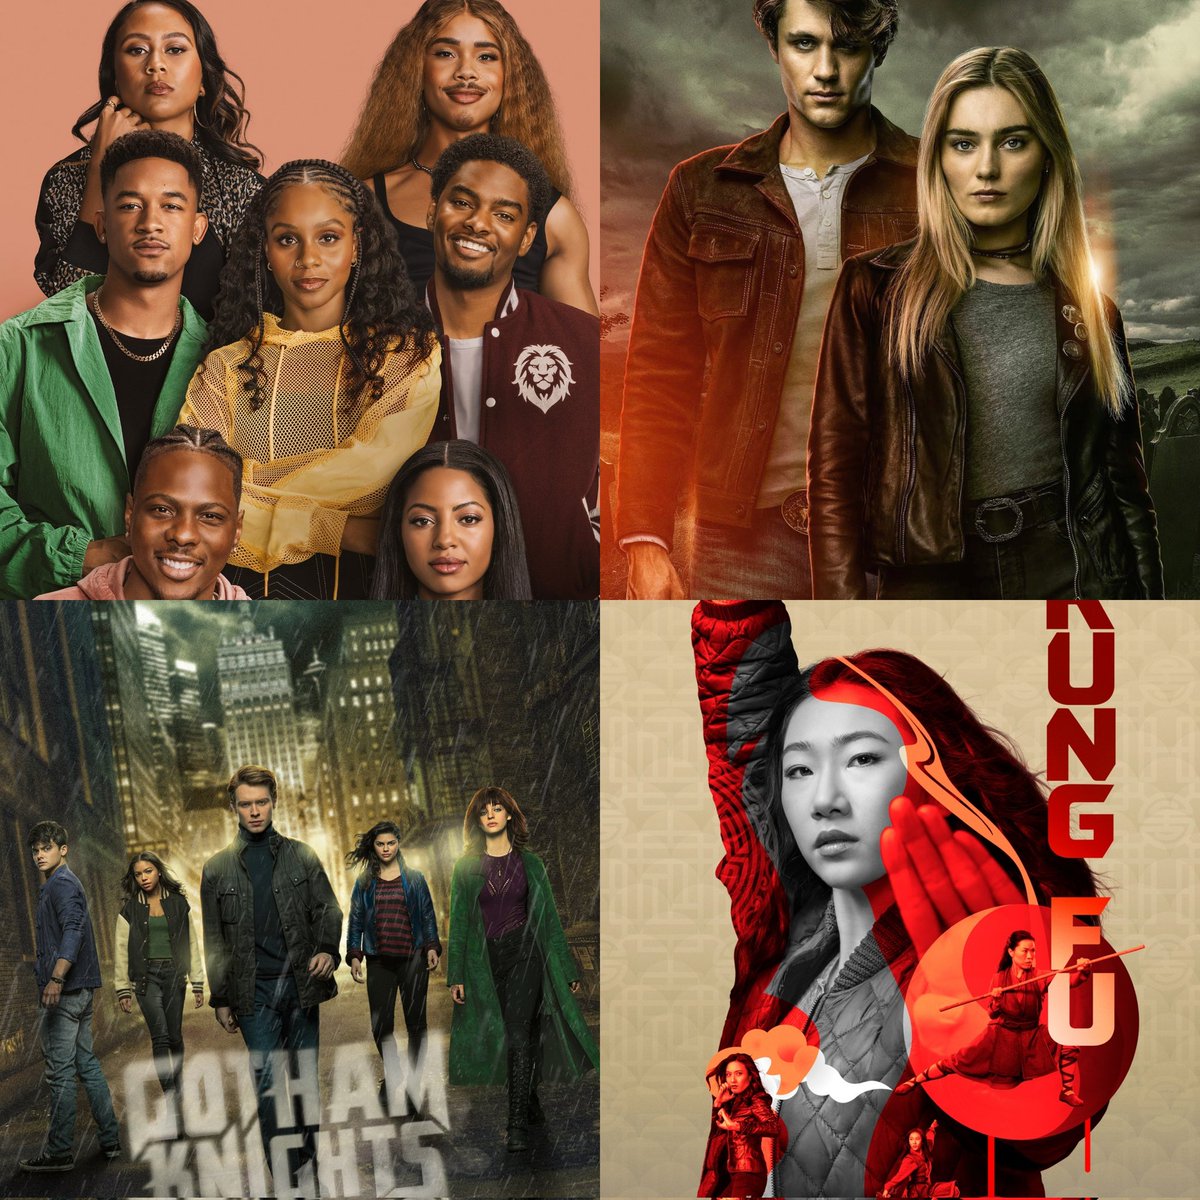 The CW news on Twitter "What shows would you like to see return in the